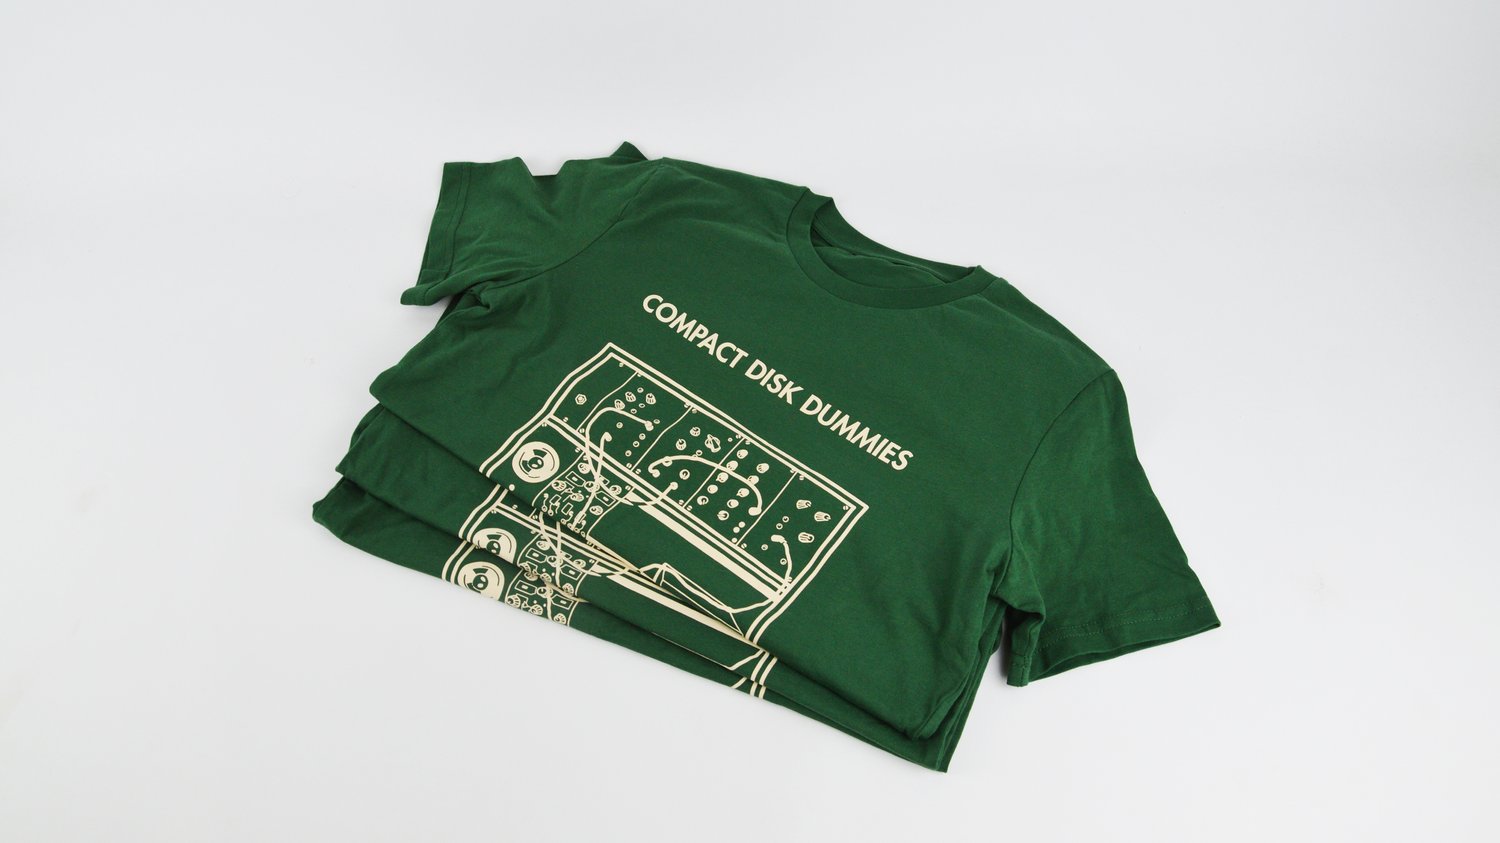 Image of "Synthaclaus" Bottle Green shirt